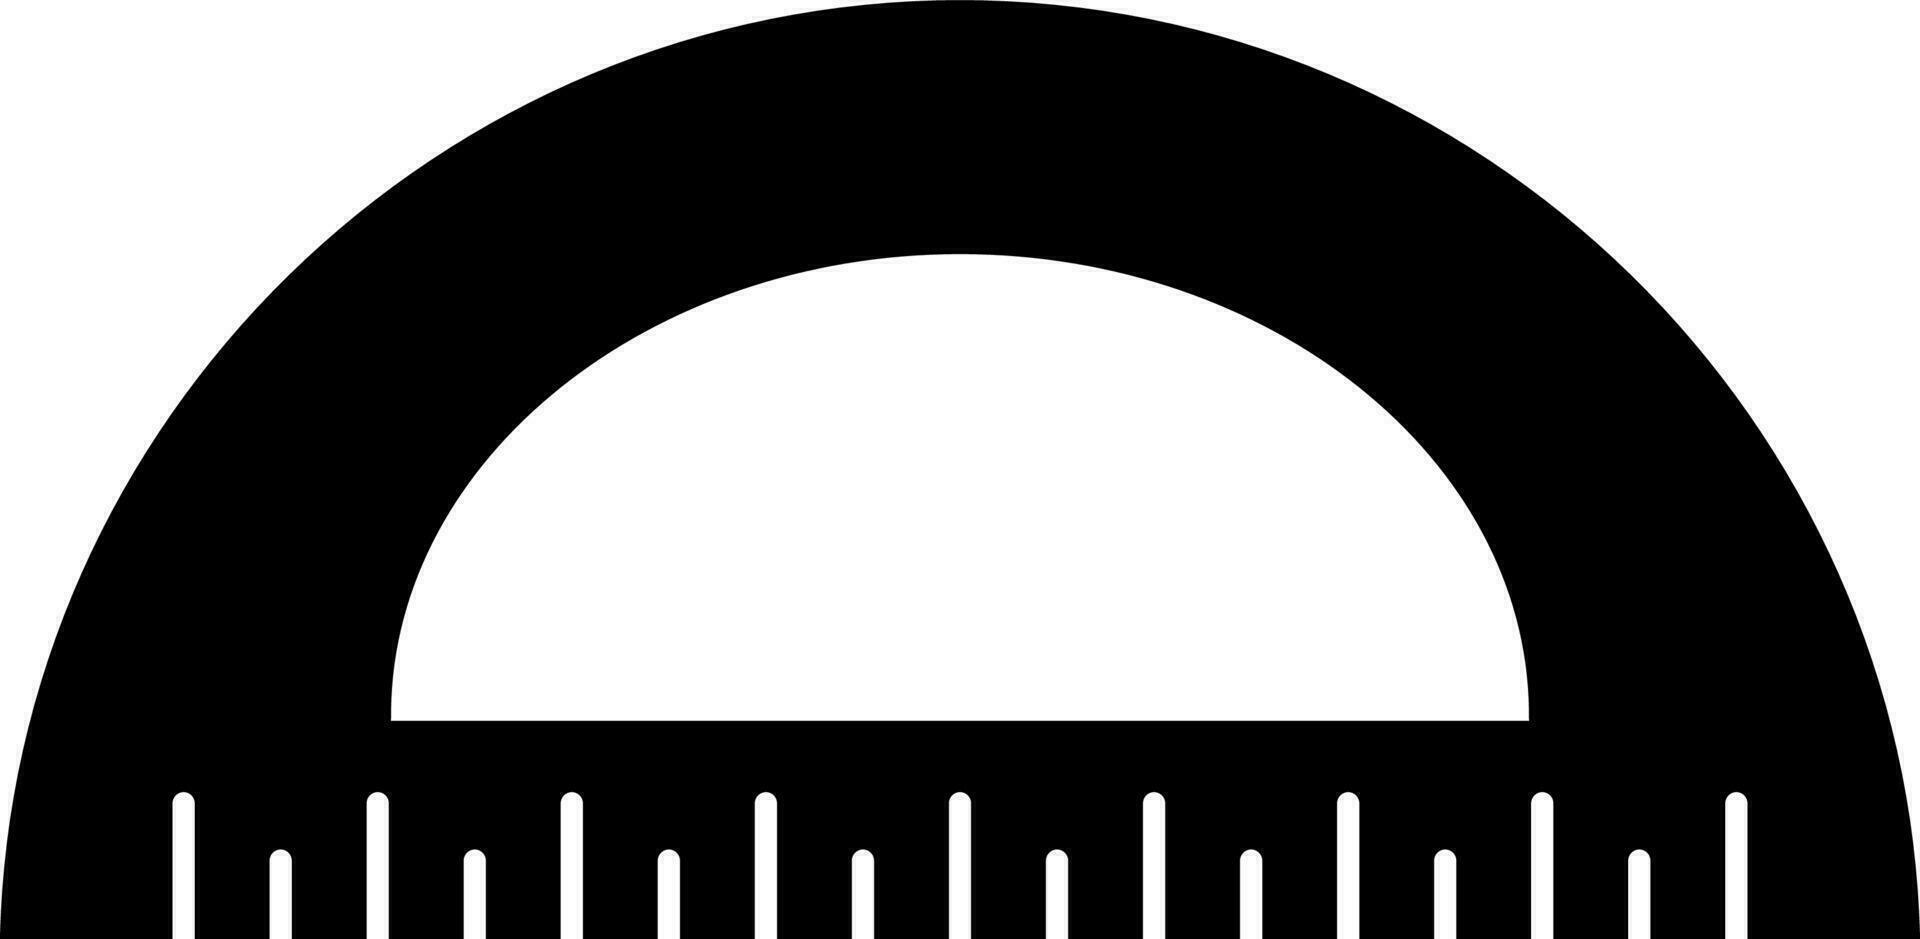 Protractor ruler icon in Black and White color. vector